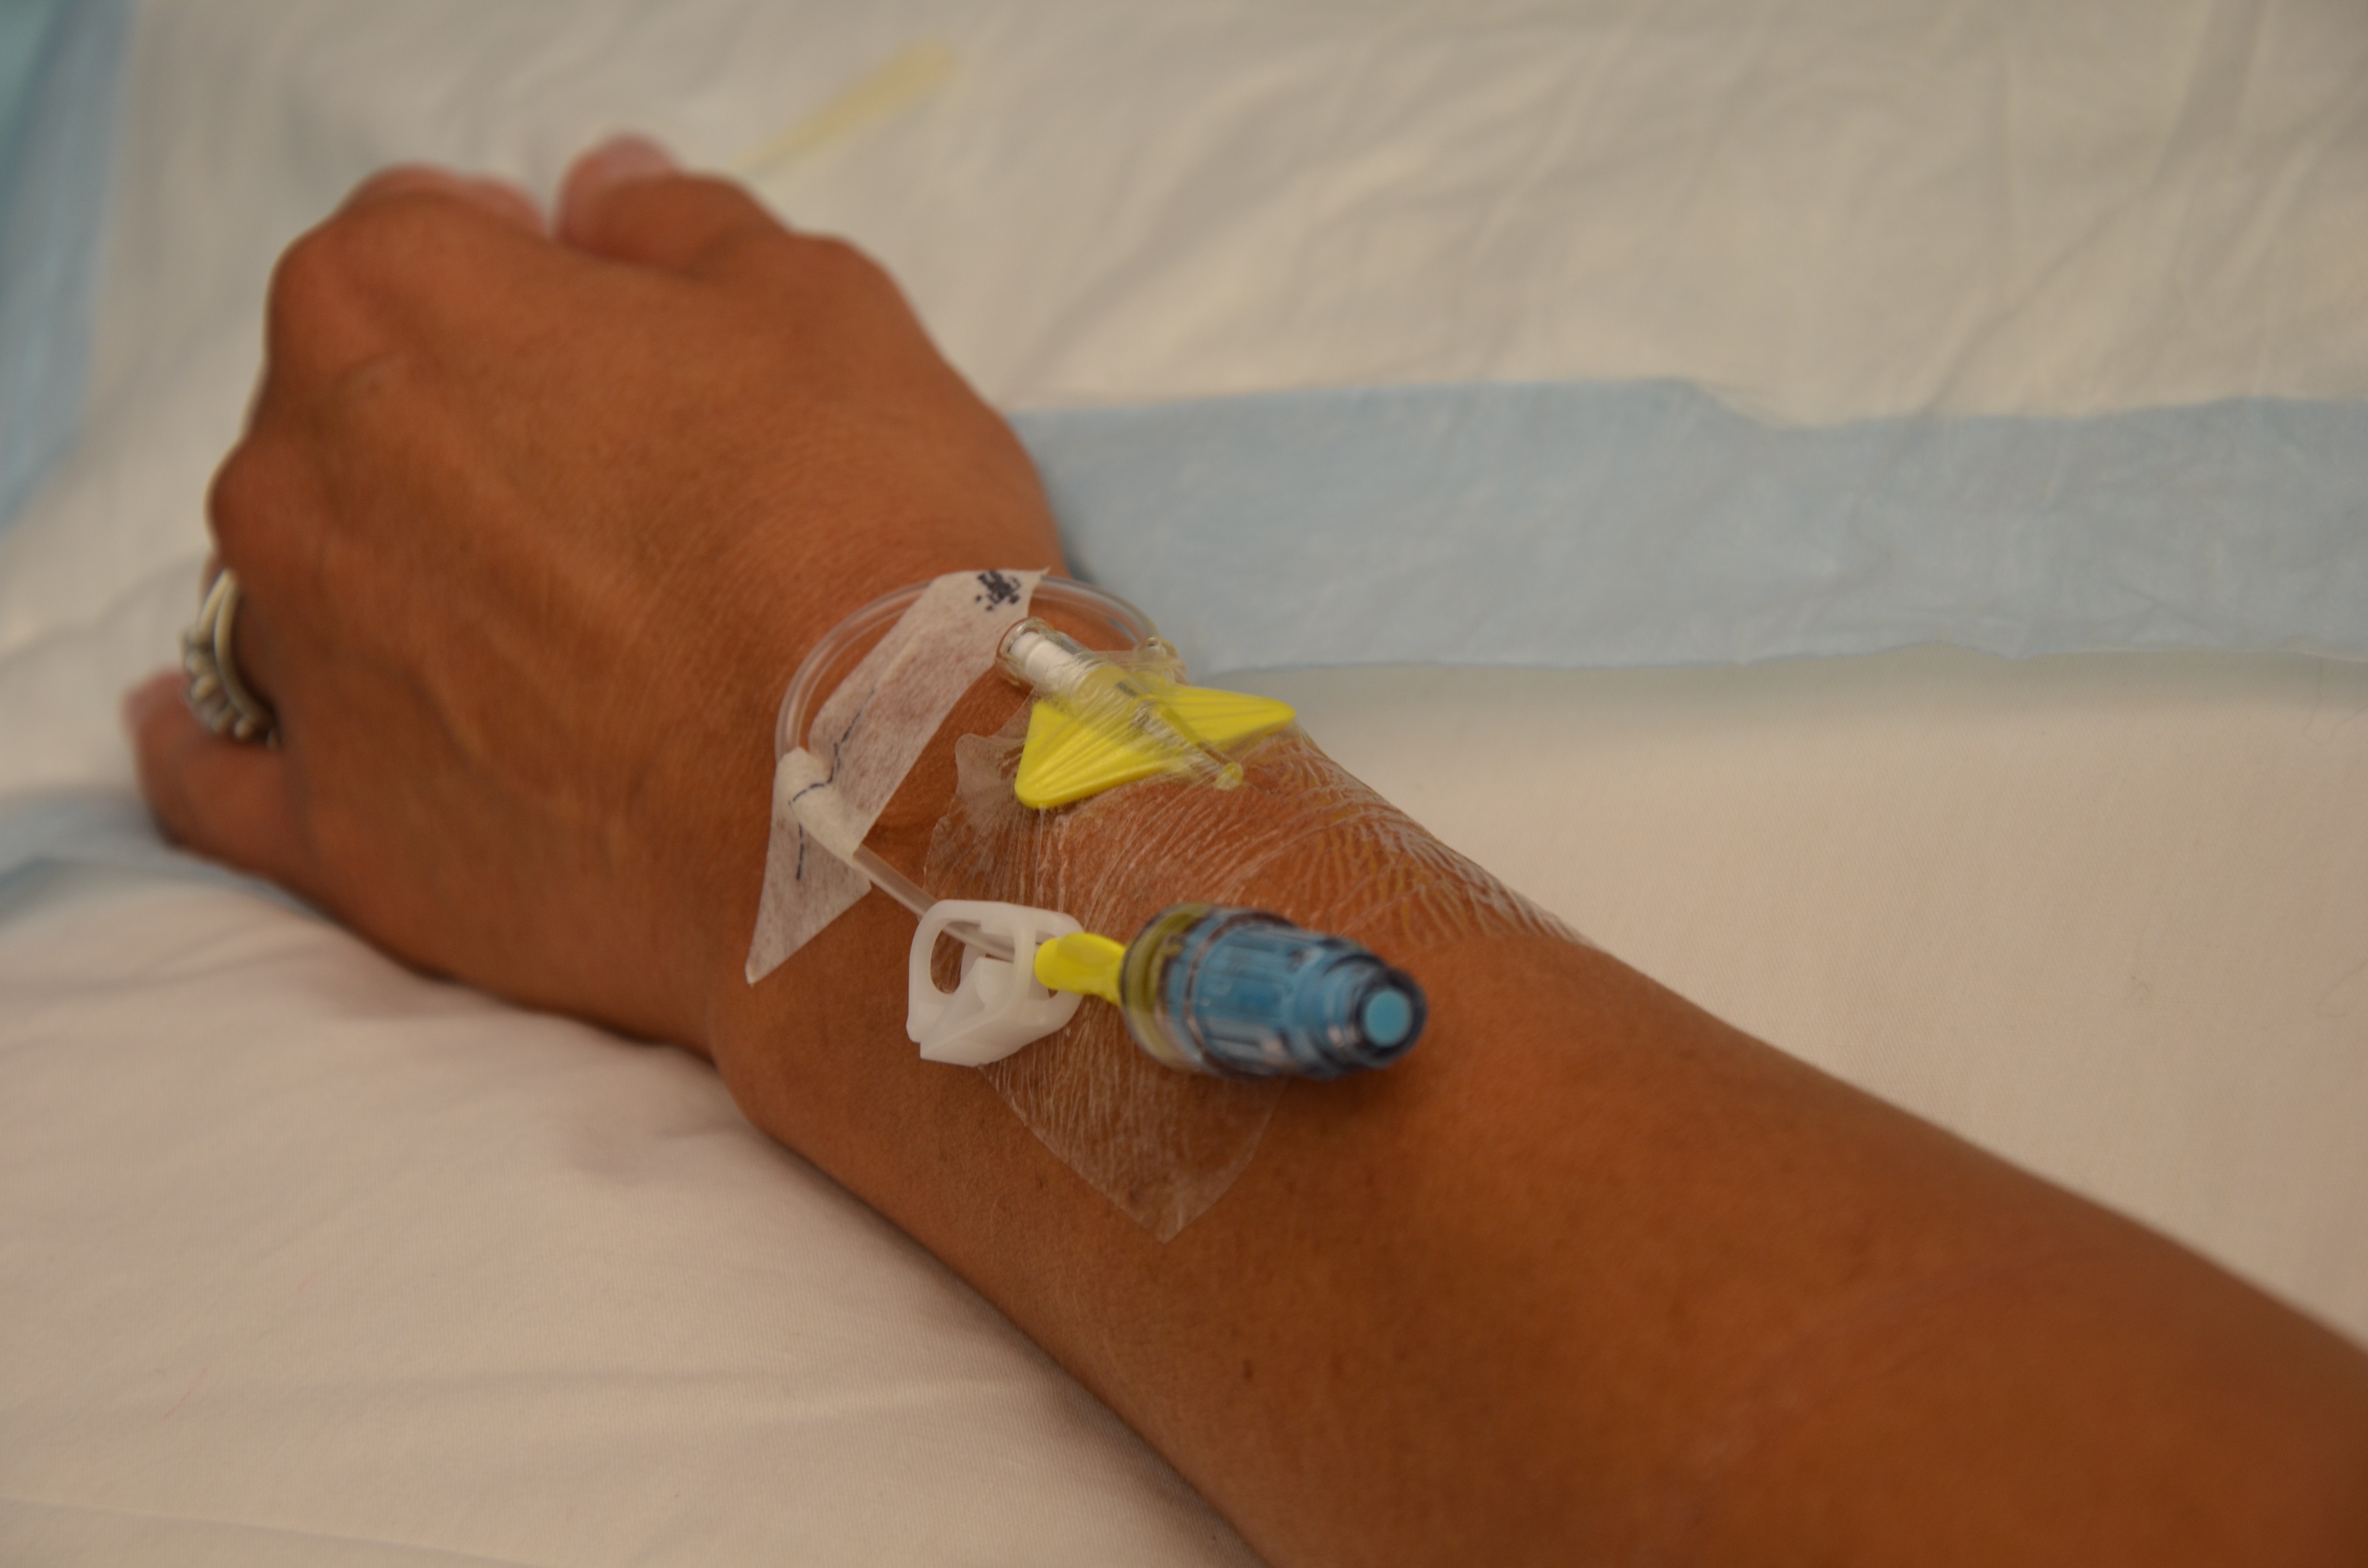 8.3 IV Fluids, IV Tubing, and Assessment of an IV System